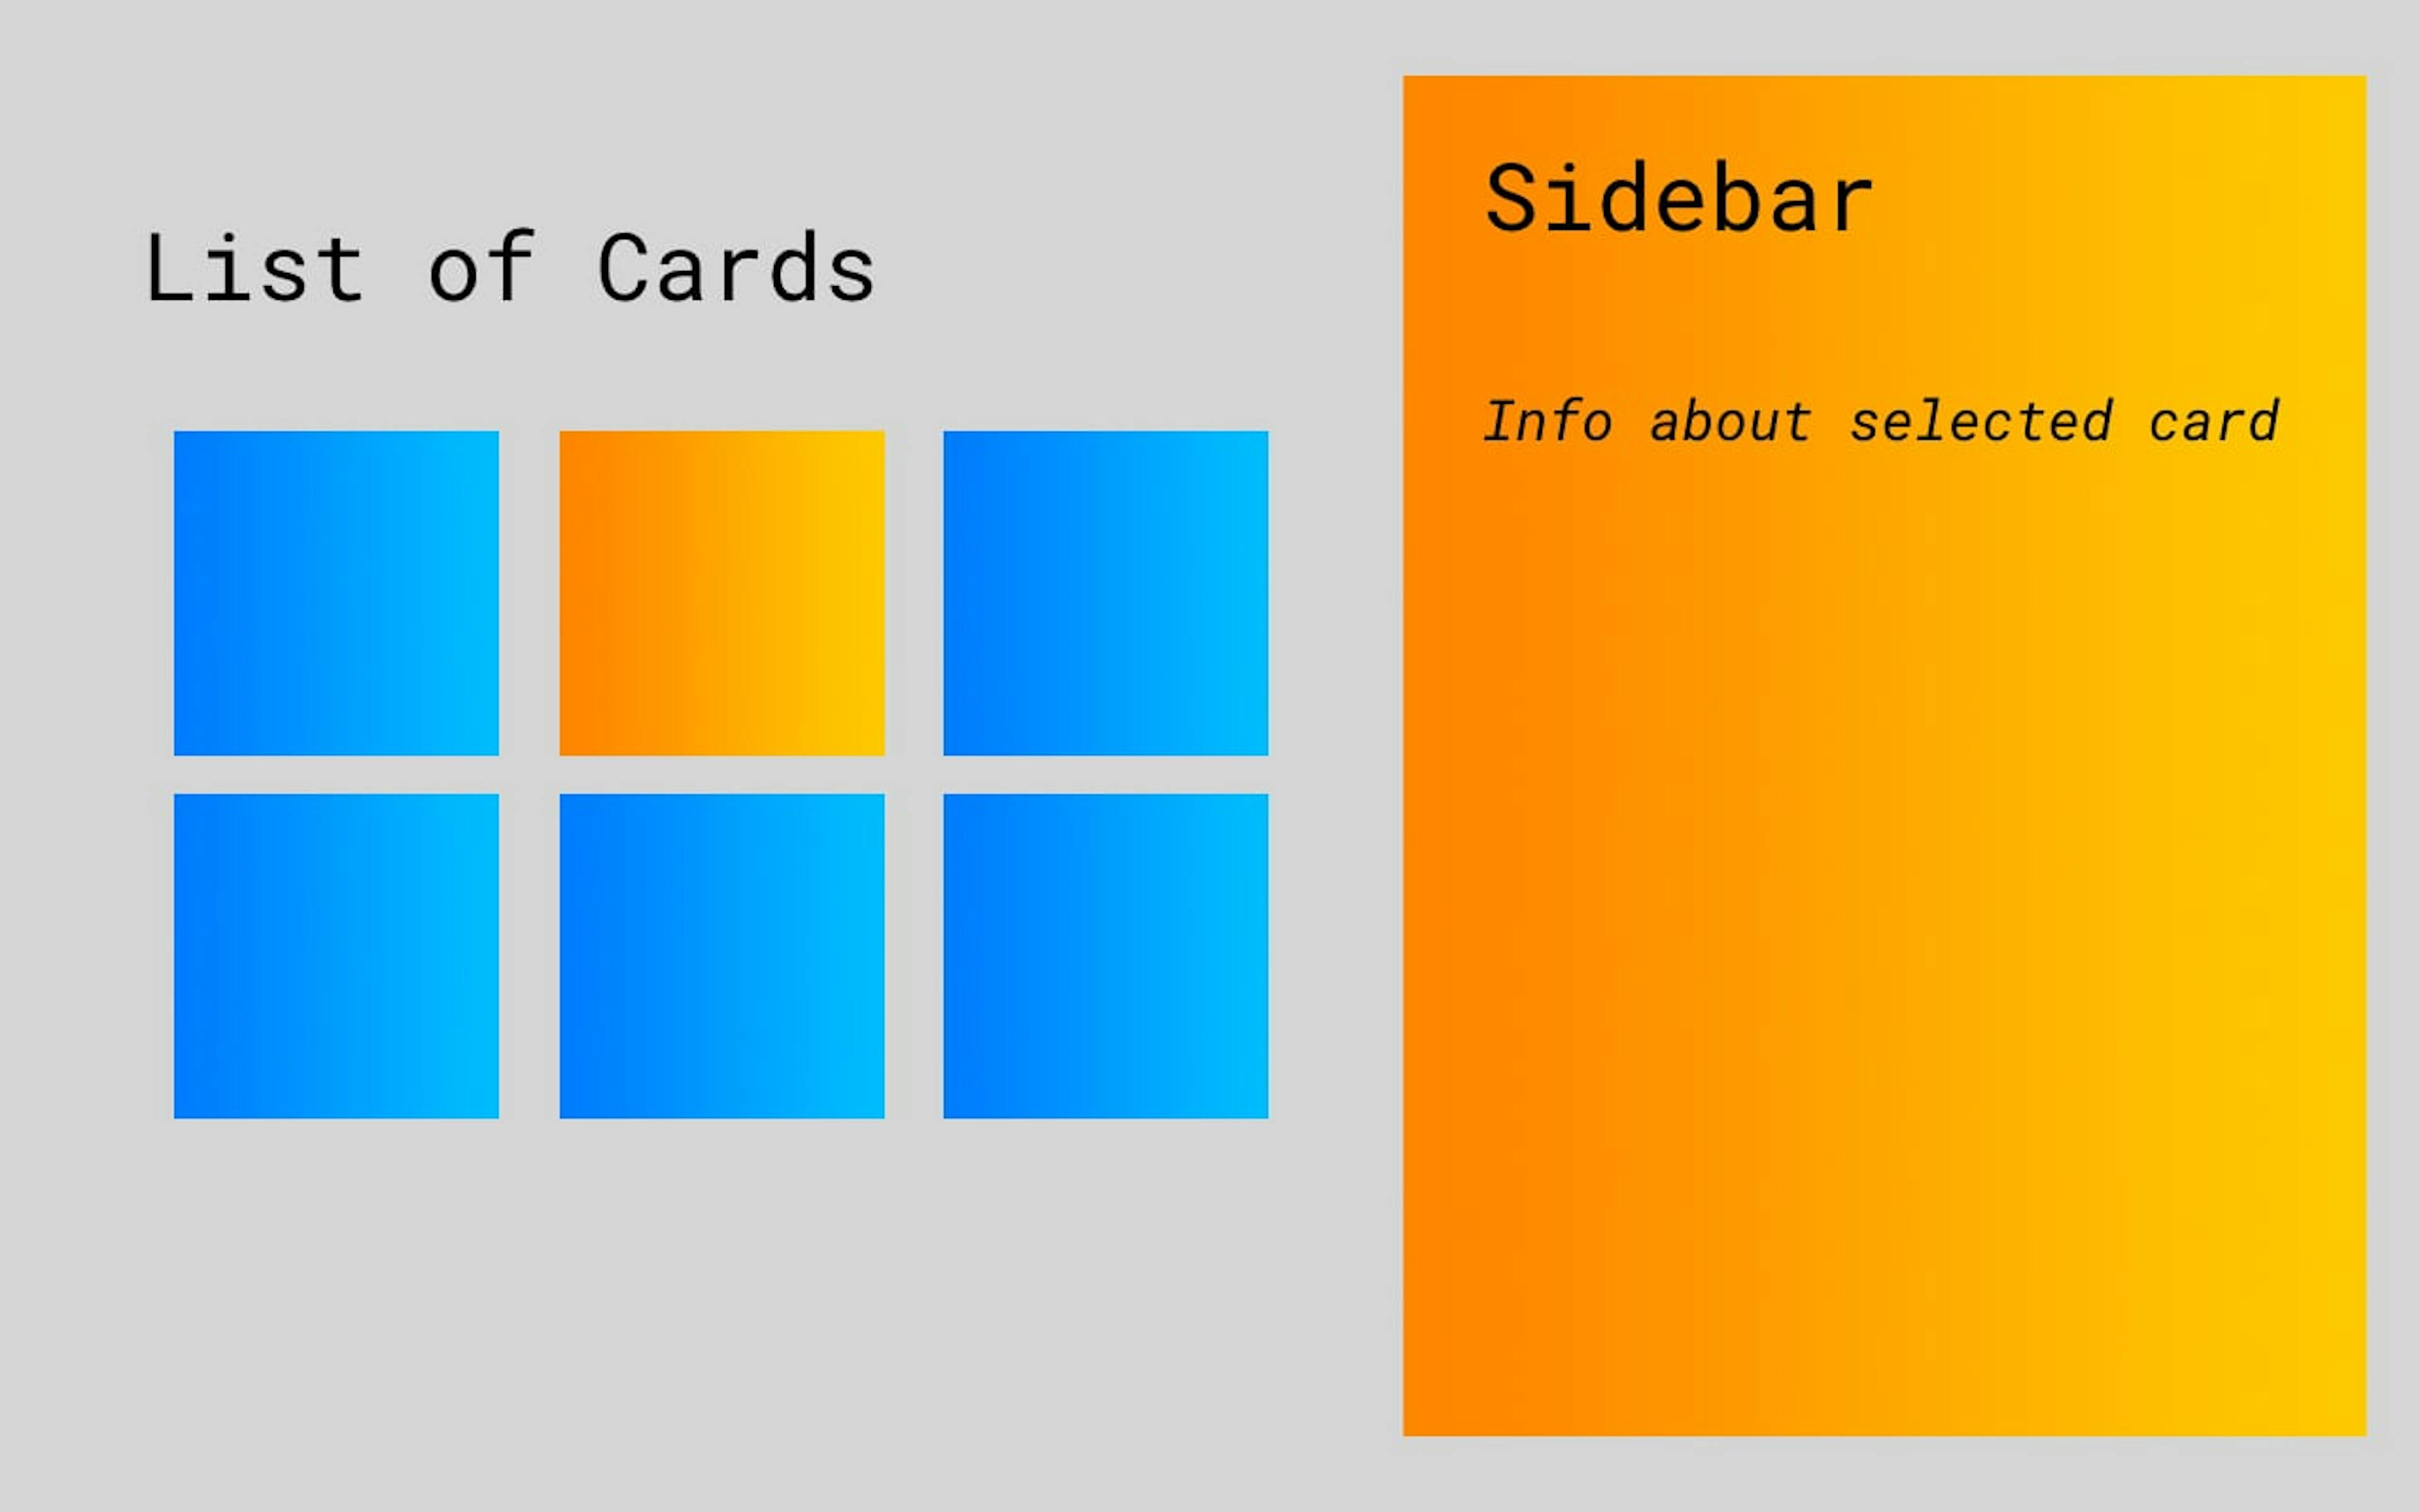 Wireframe of a page showing, on the left, a list of cards and on the right a sidebar. One card is highlighted in orange. The sidebar is also orange and is intended to show a linformation about the selected card.